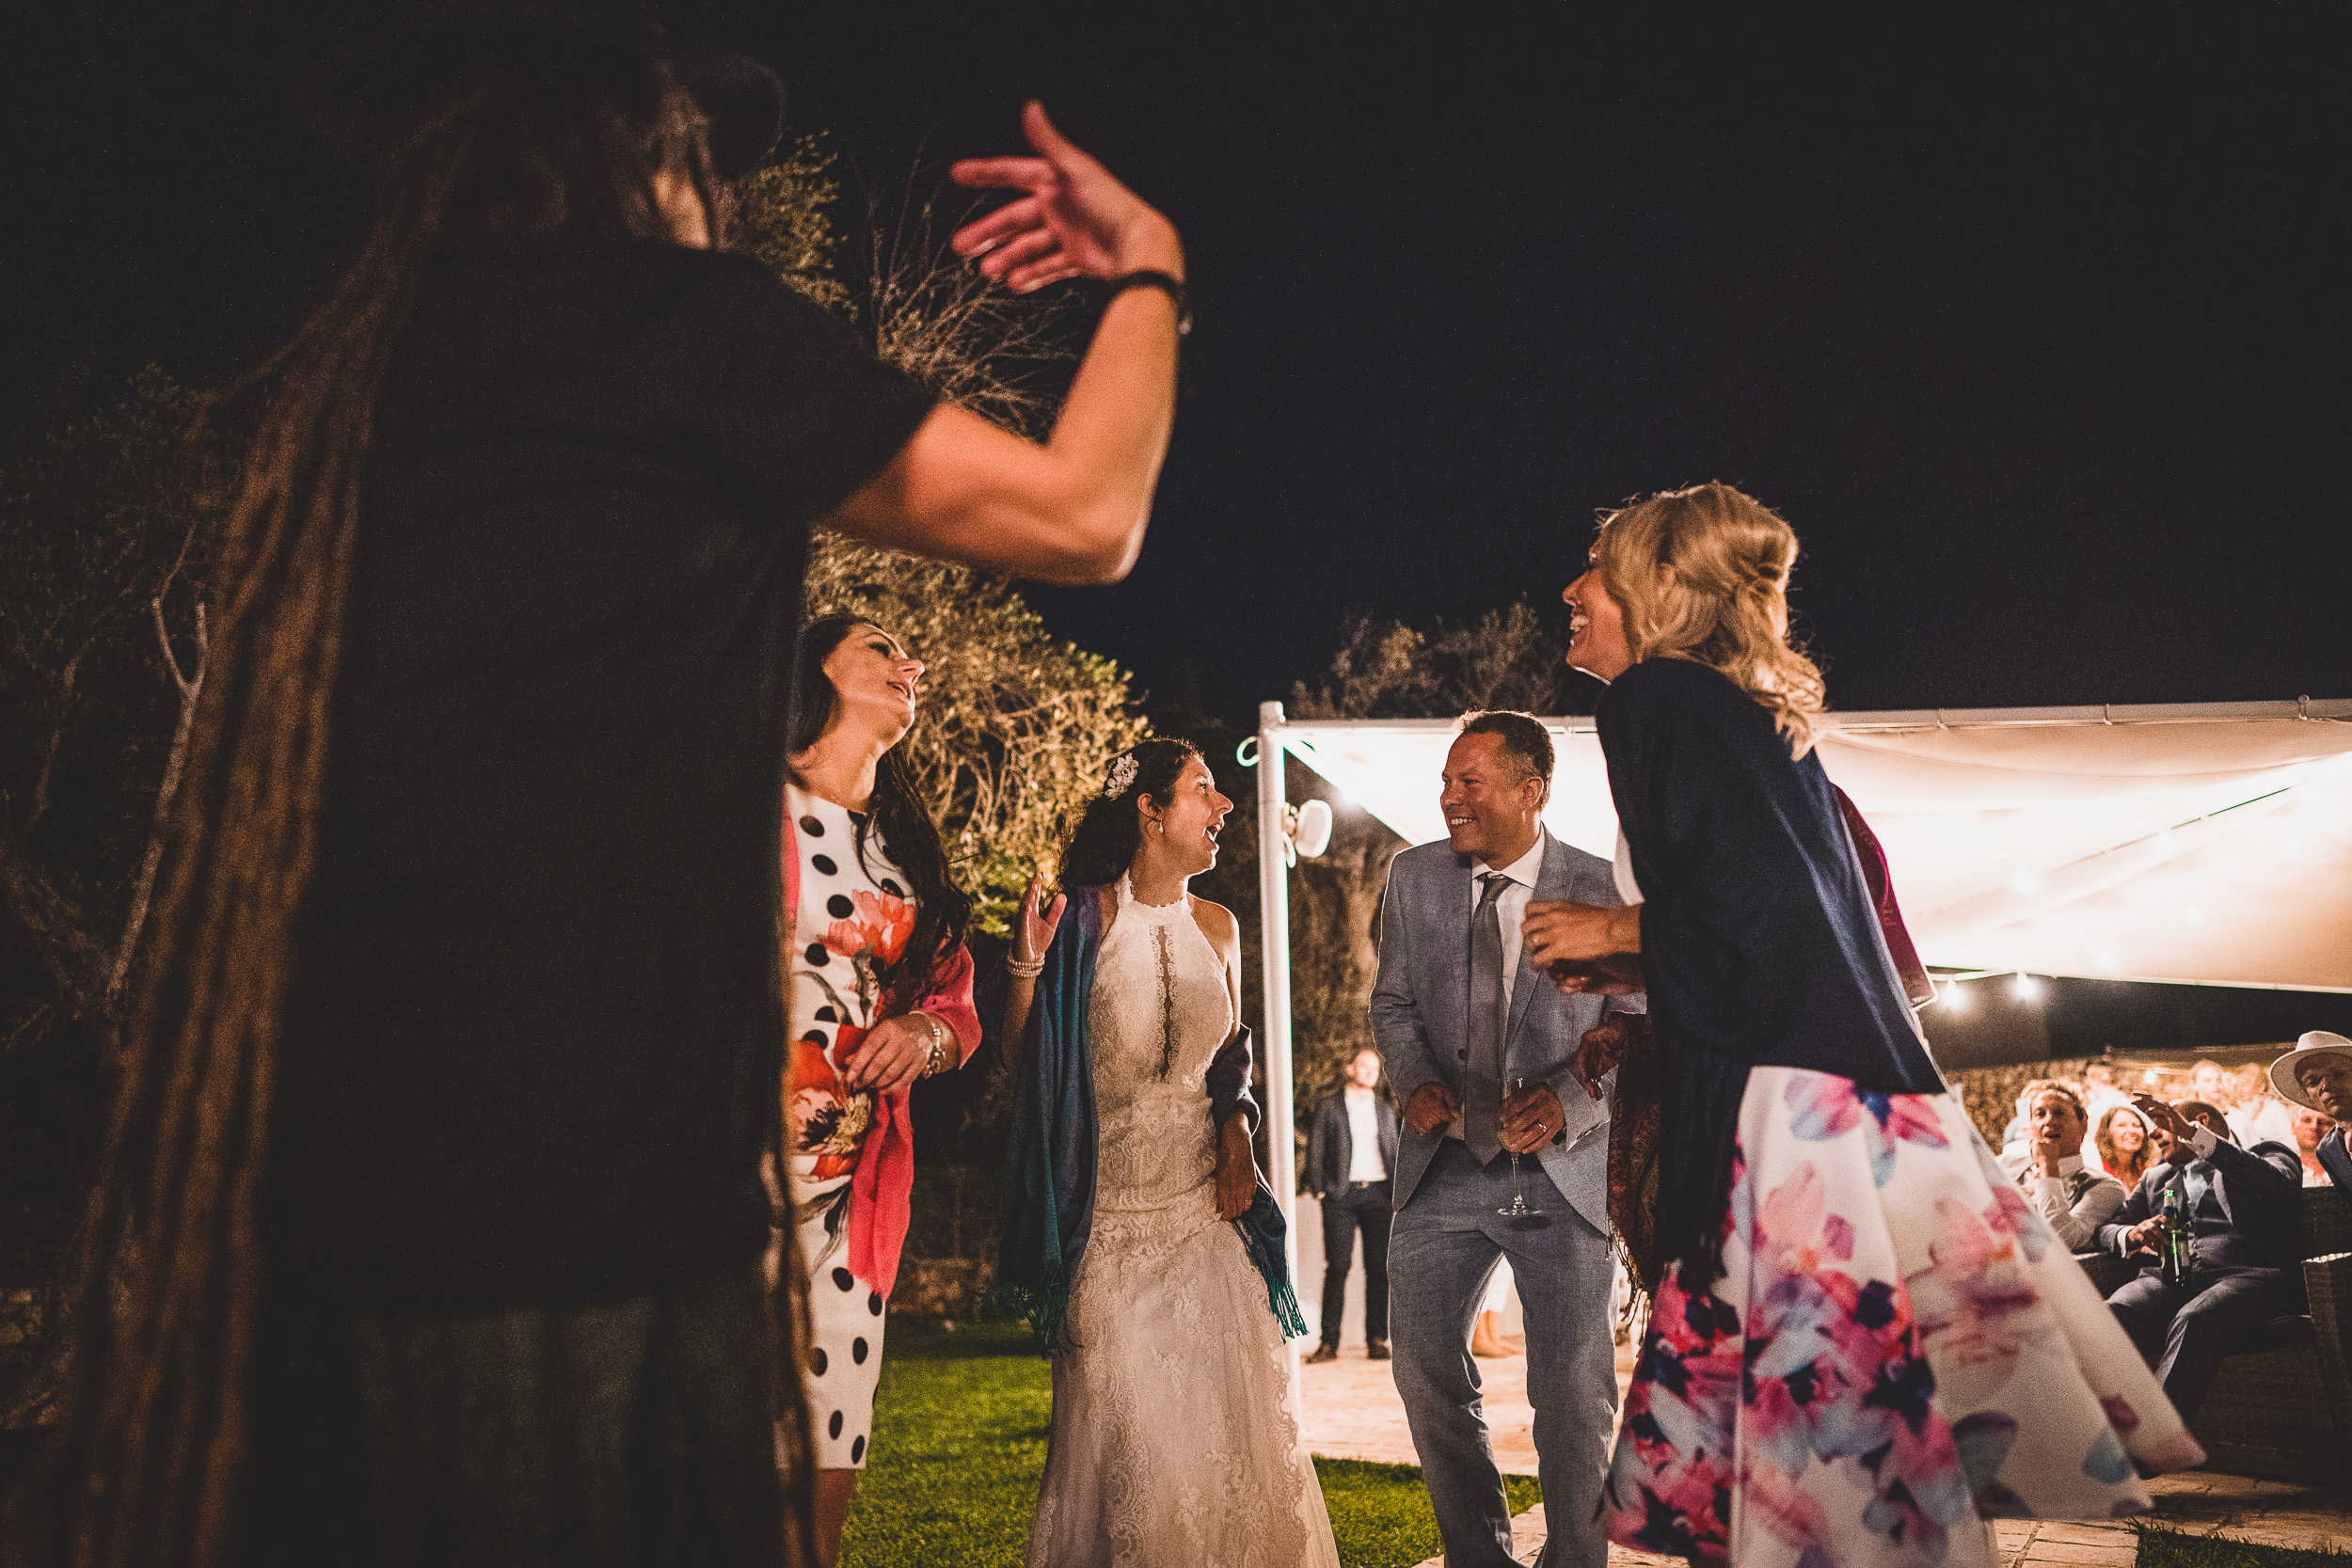 A group of people celebrating at a wedding, dancing in a garden at night.